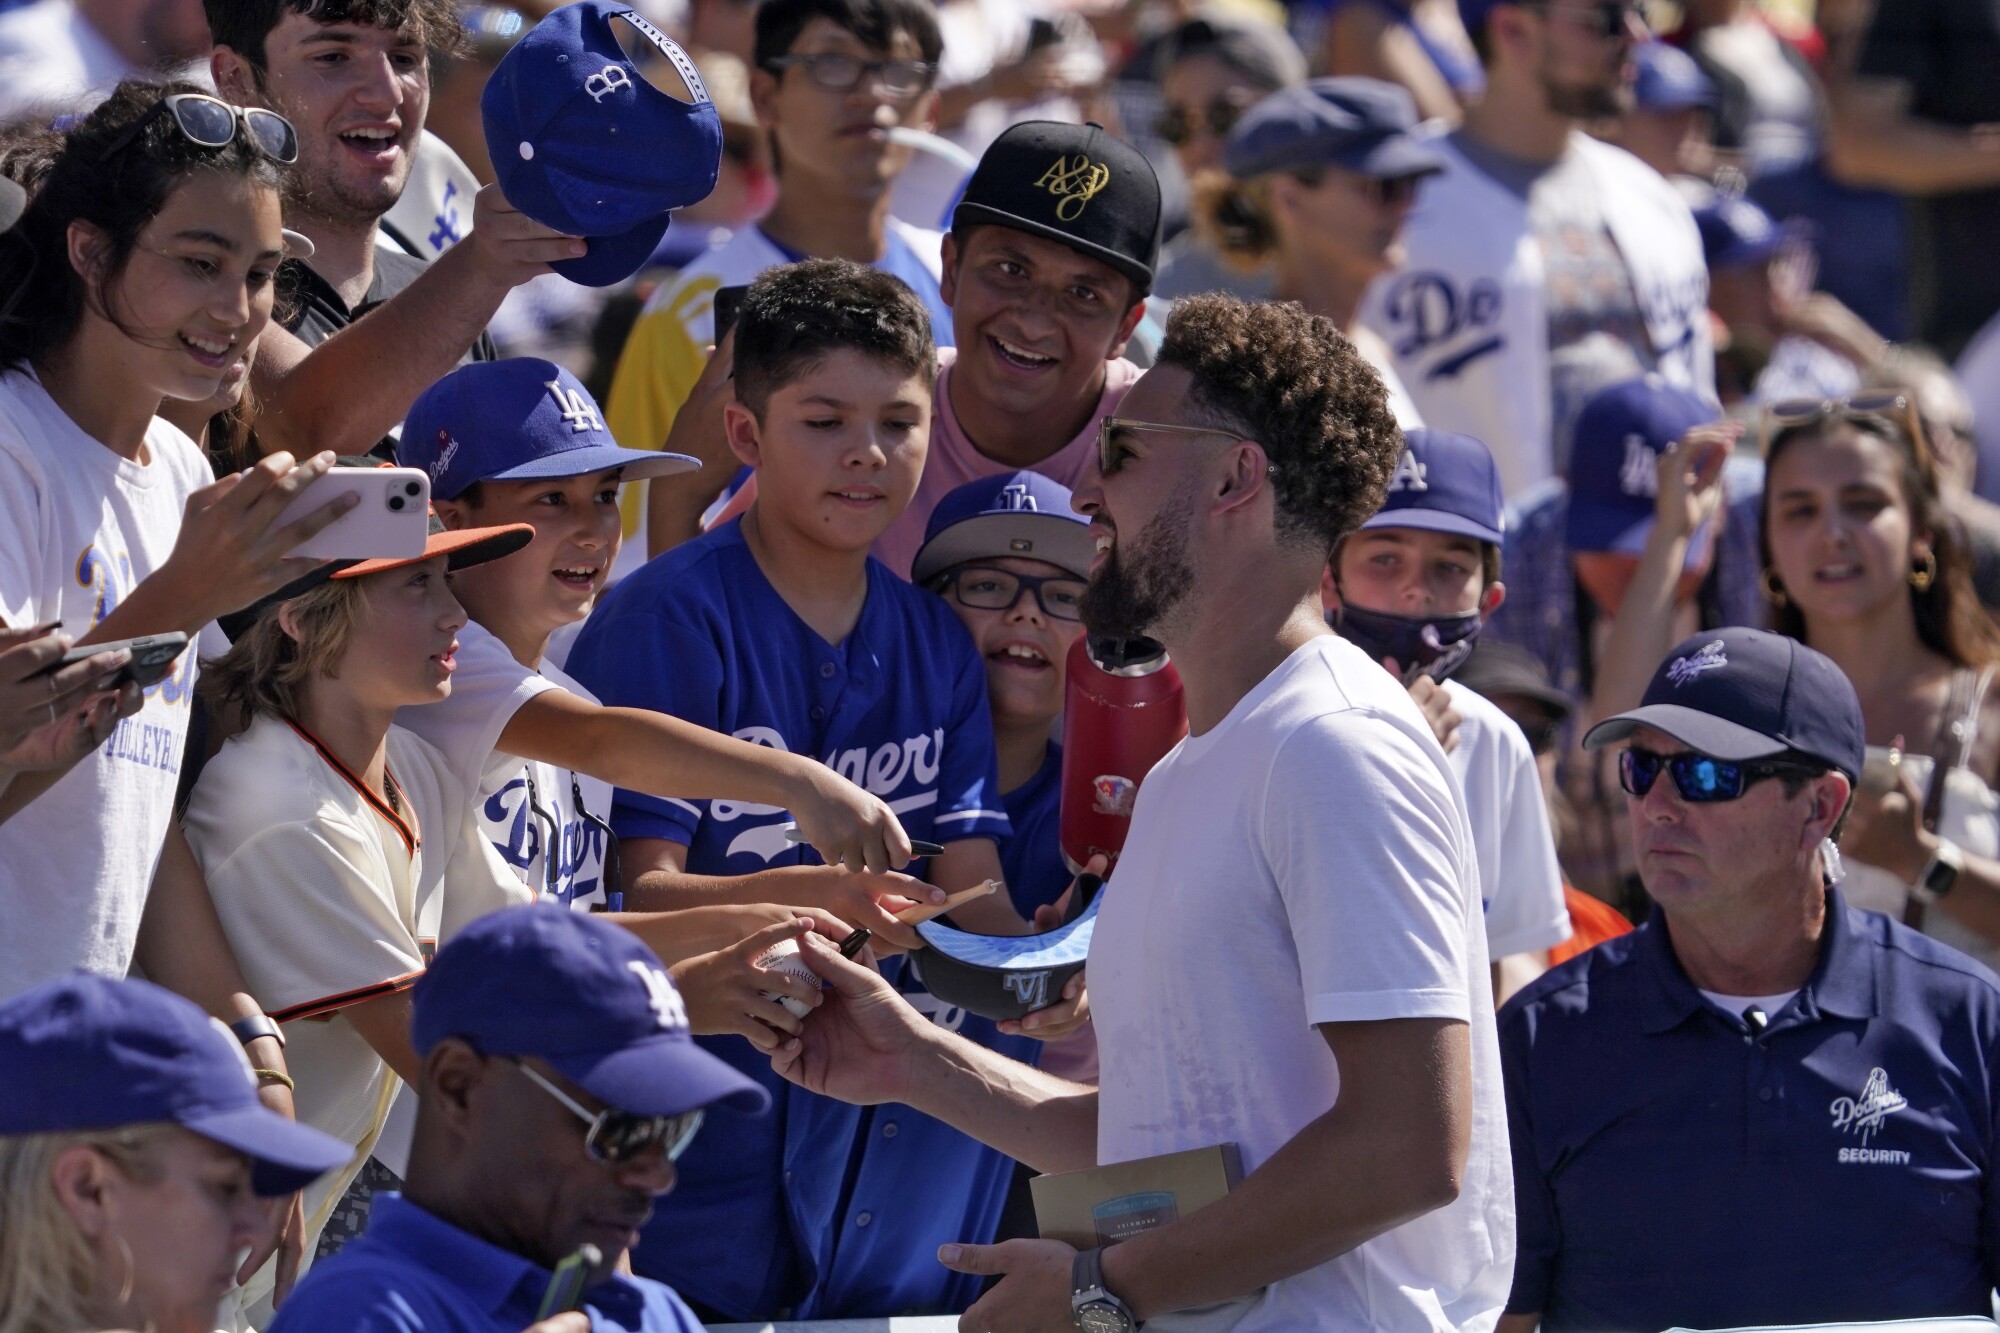 Golden State Warriors star Klay Thompson signs autographs for fans as they watch the Dodgers play the San Francisco Giants